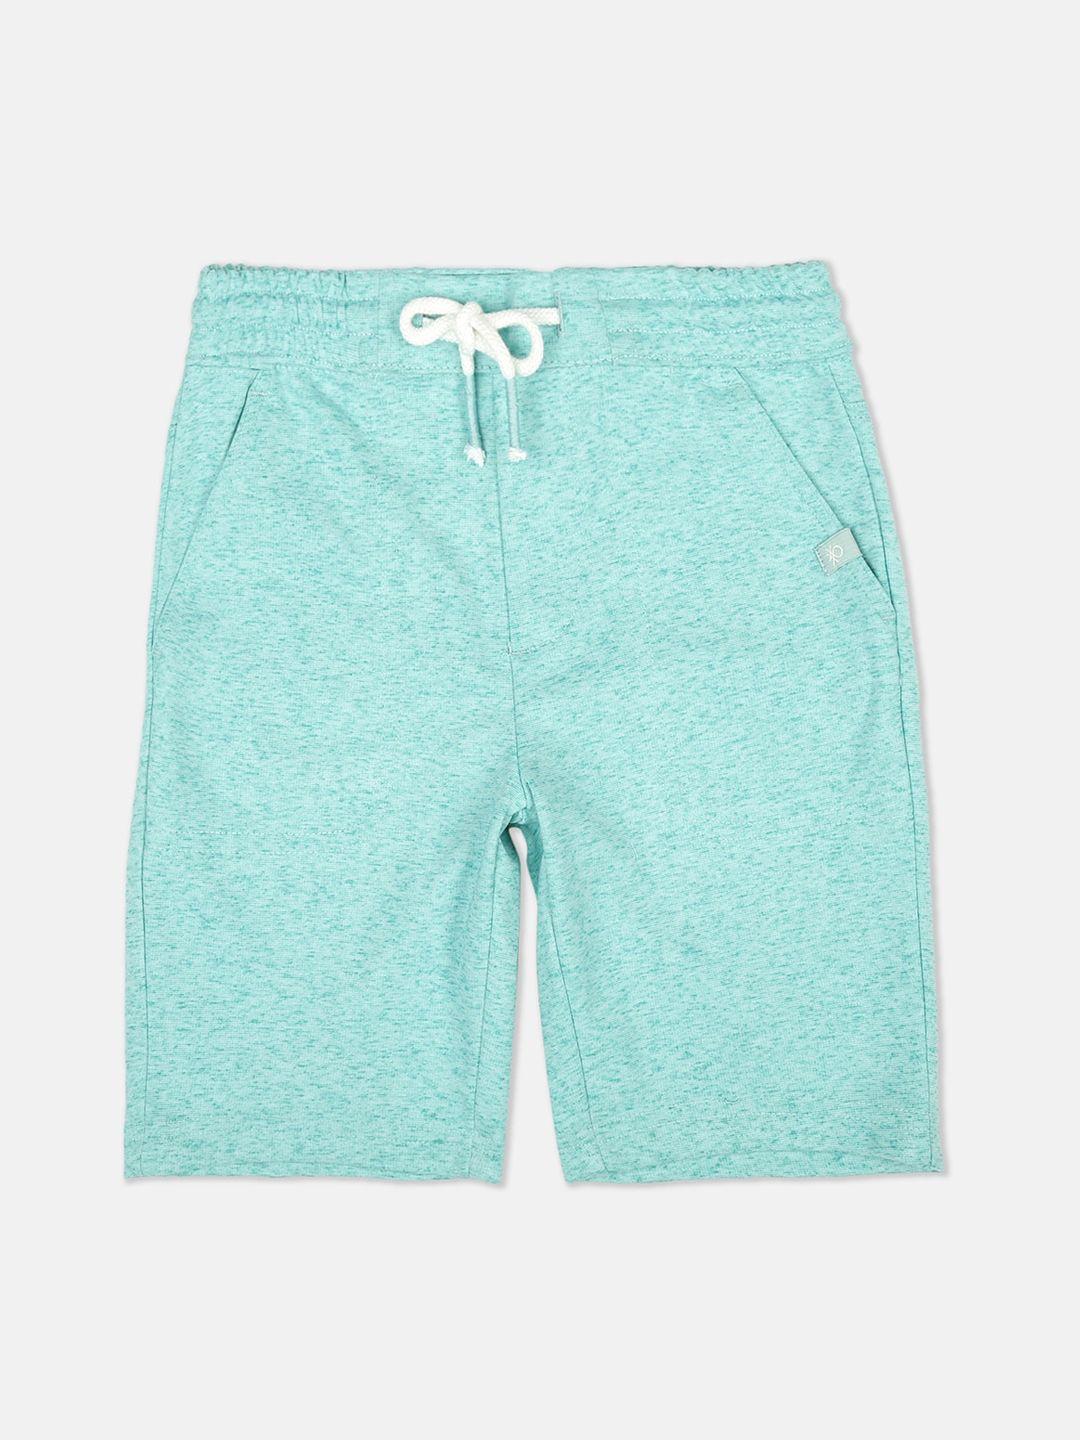 united-colors-of-benetton-boys-green-shorts